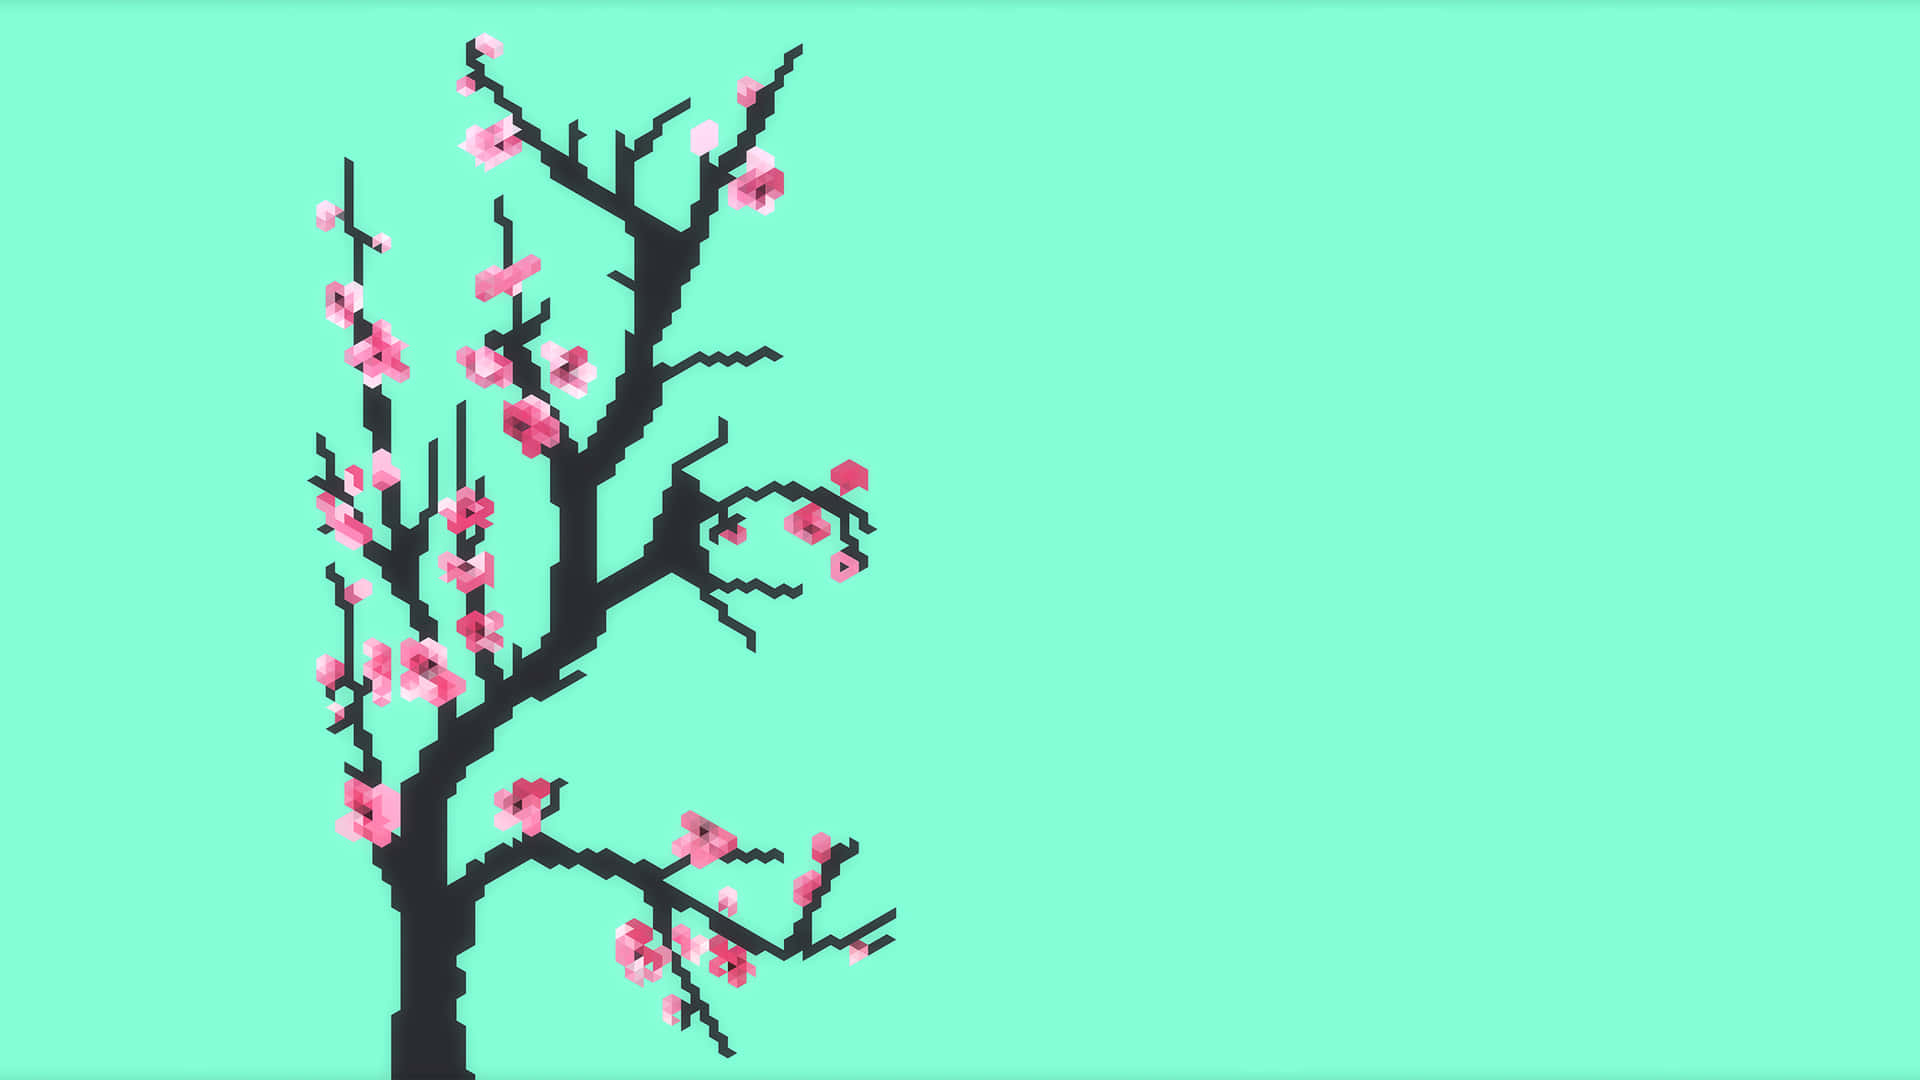 A Pixelated Tree With Pink Blossoms On A Turquoise Background Wallpaper